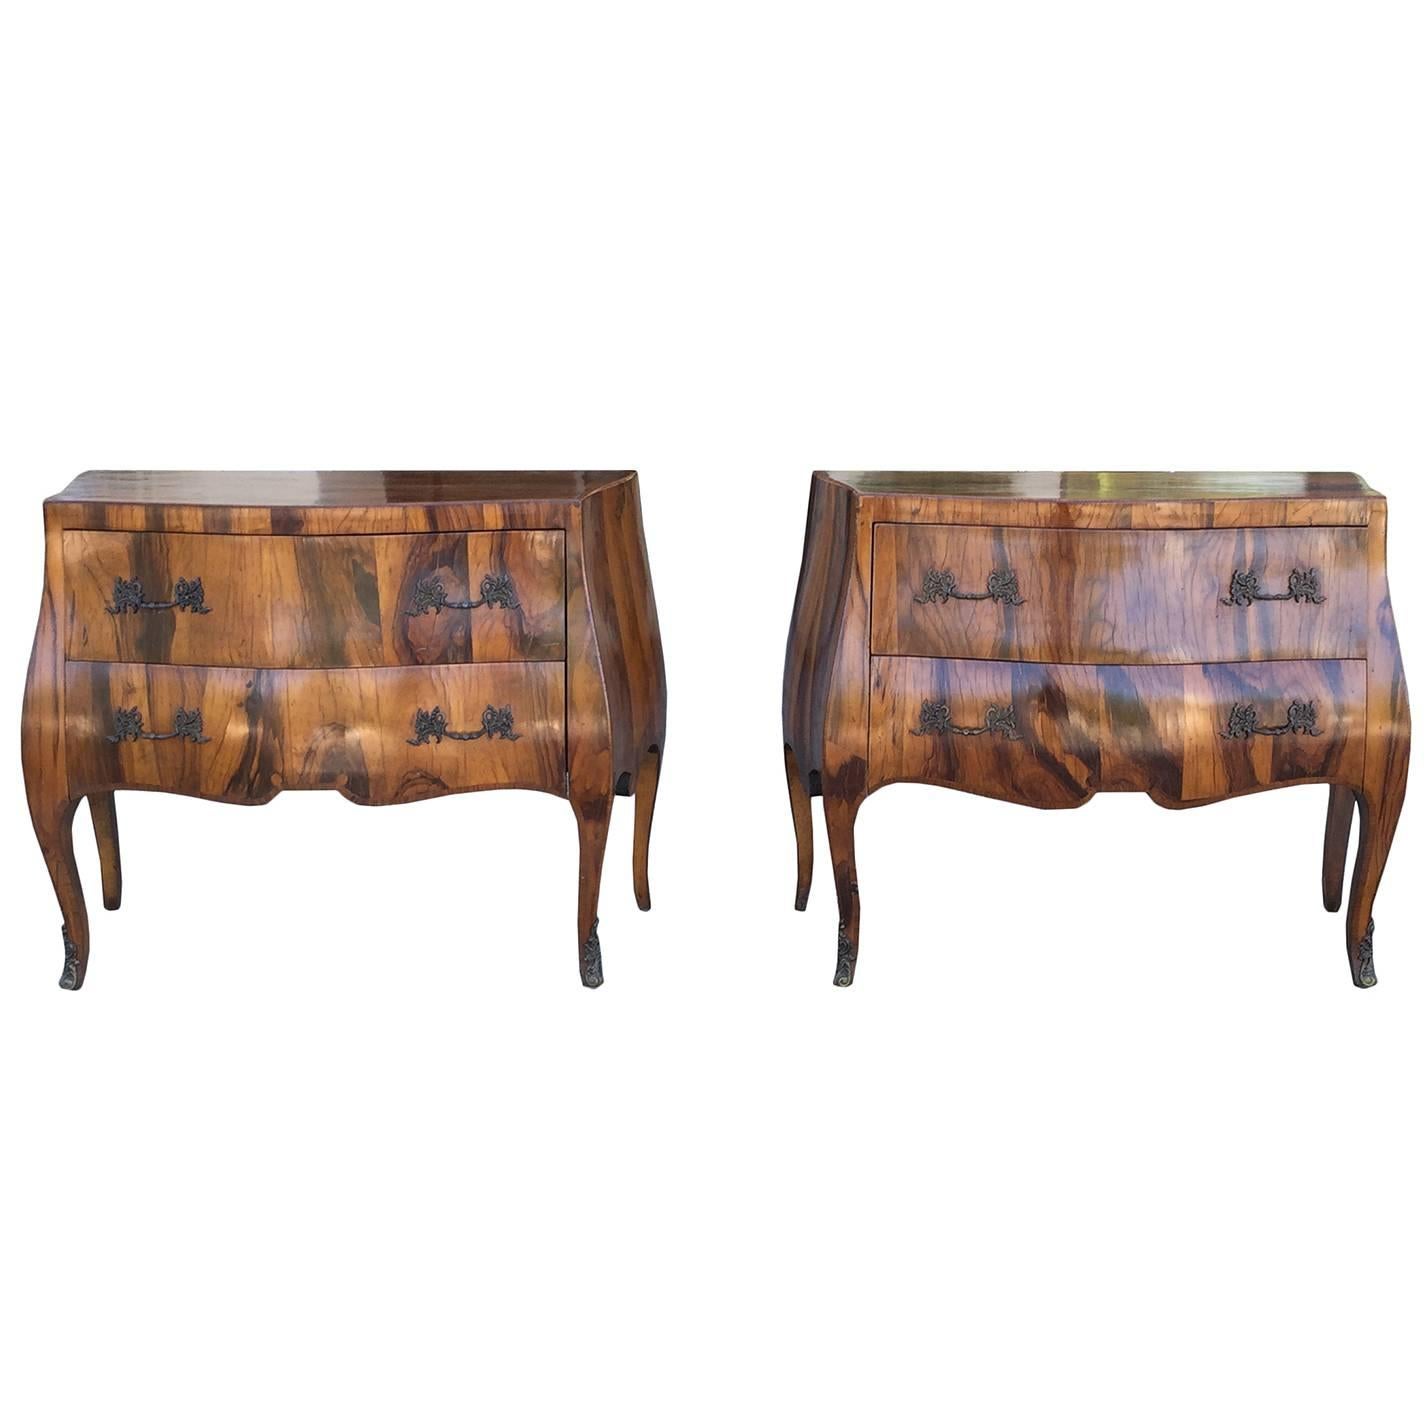 Pair of Midcentury Italian Burled Wood Two-Drawer Commodes